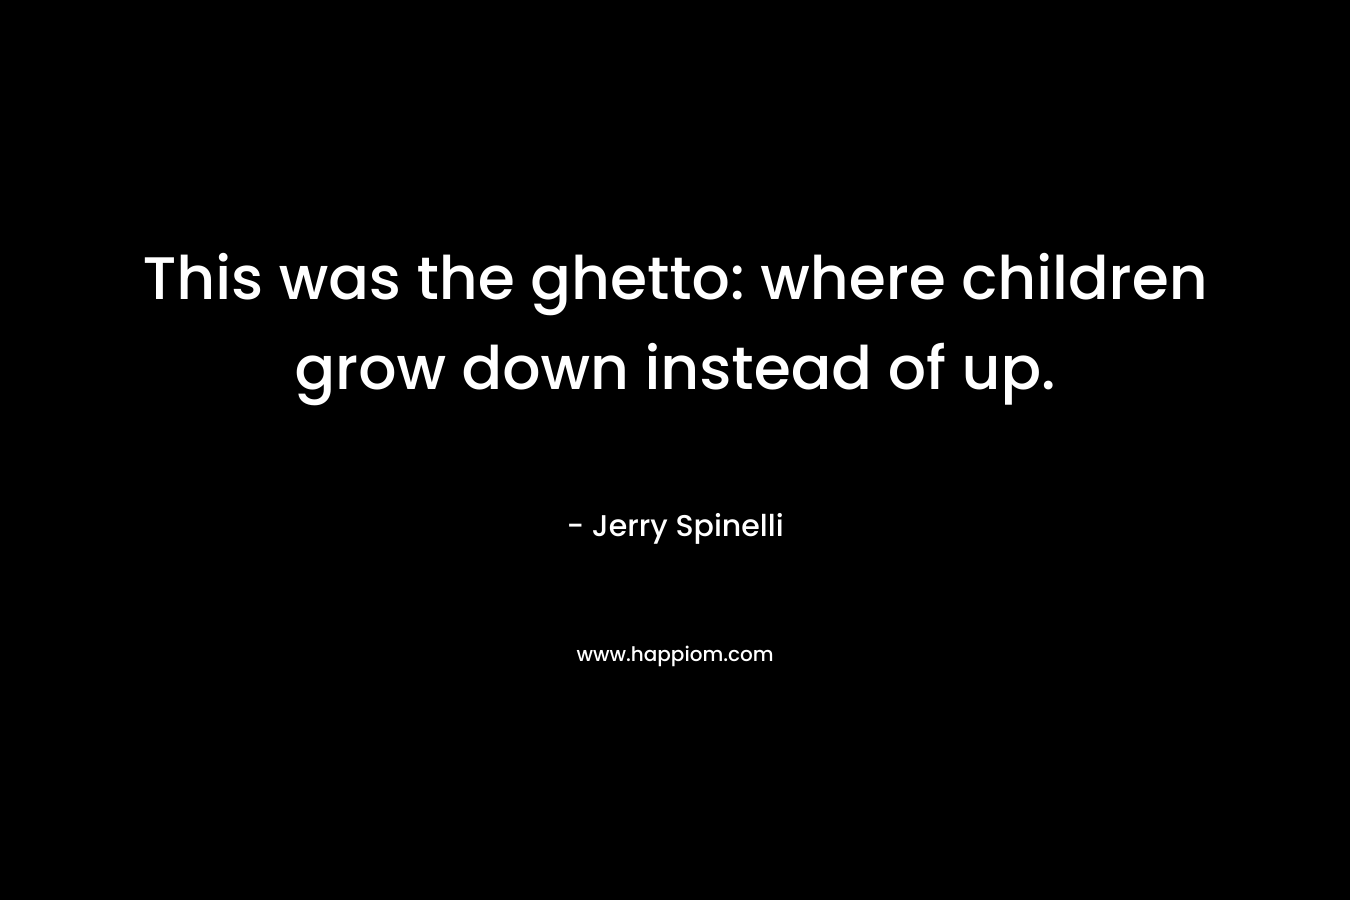 This was the ghetto: where children grow down instead of up. – Jerry Spinelli